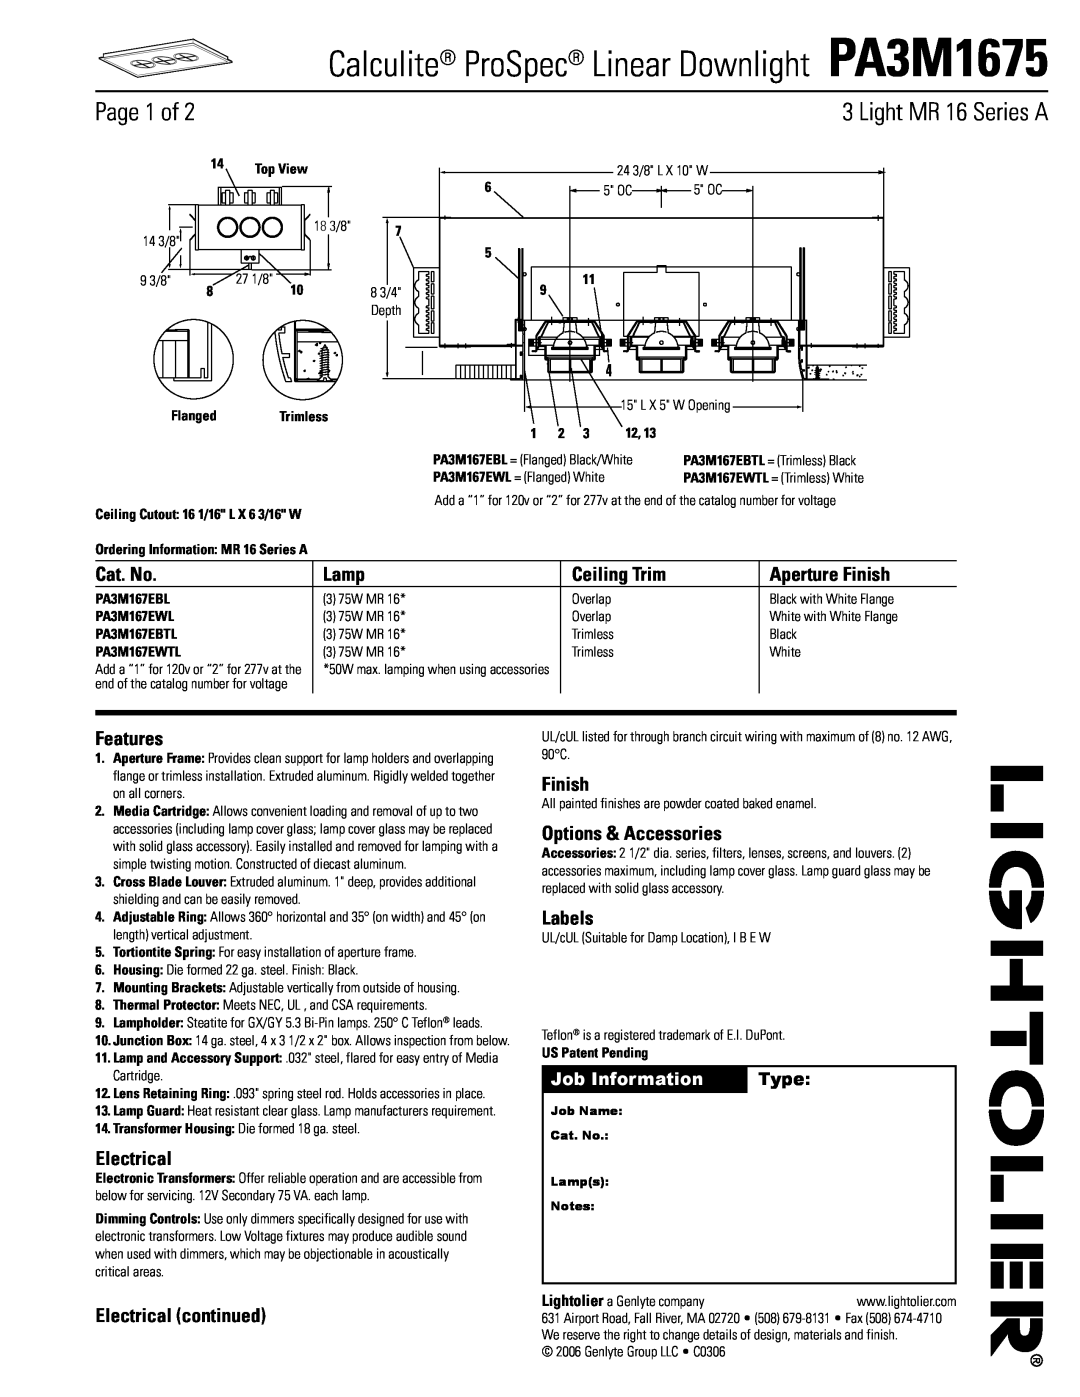 Lightolier manual Calculite ProSpec Linear Downlight PA3M1675, Page 1 of, Light MR 16 Series A, Cat. No, Lamp, Features 